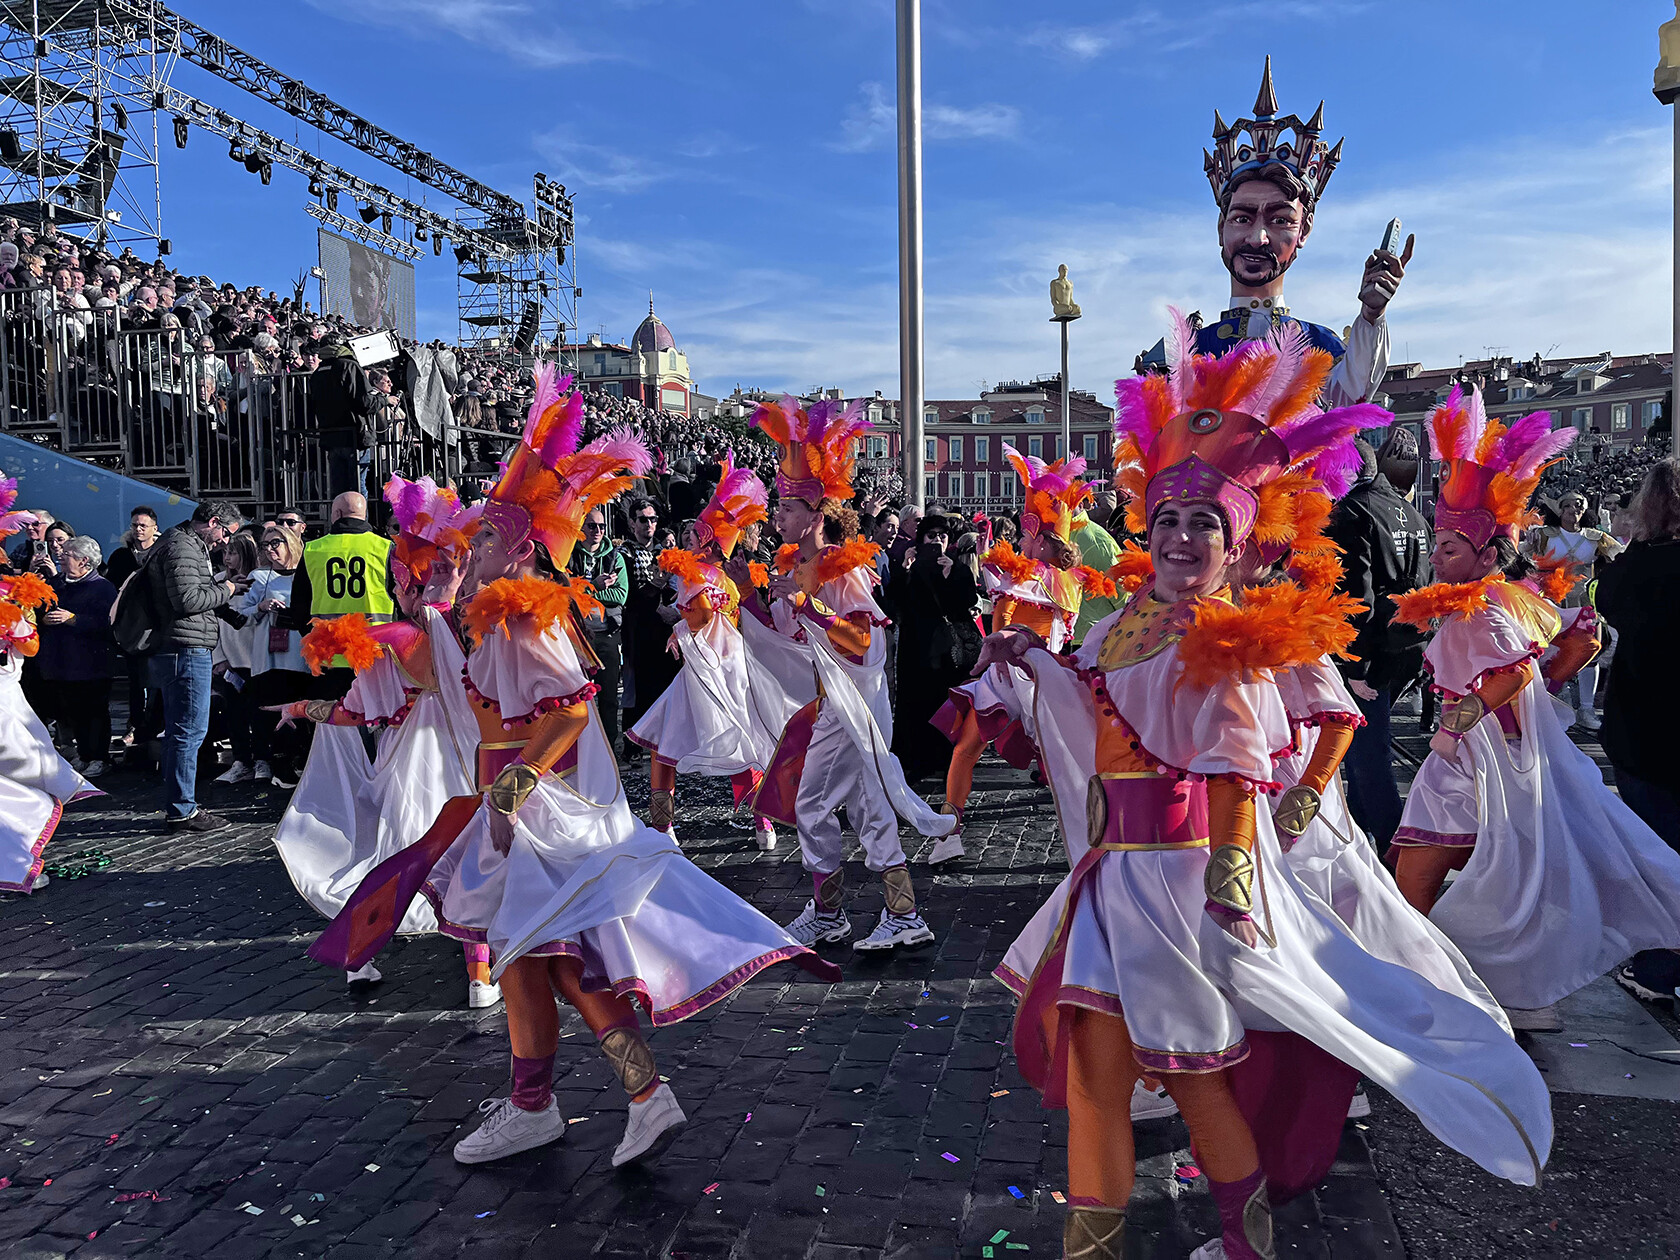 Highlights of Carnaval in Nice and a Bit of History